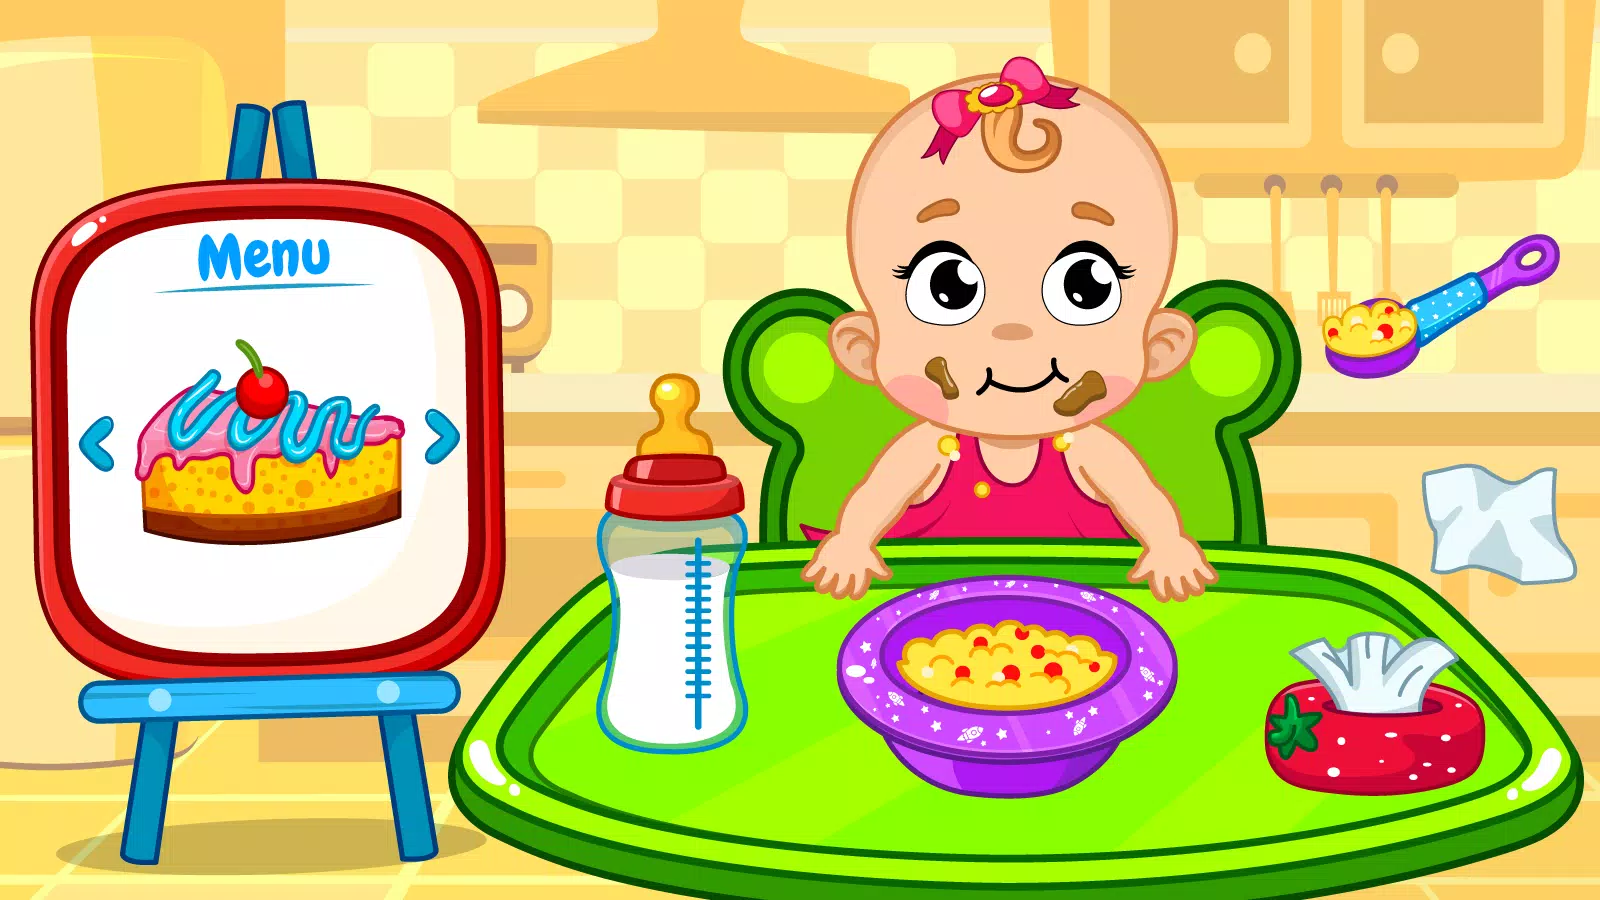 Doll Girl Daycare Baby Games Apk Download for Android下载-Doll Girl Daycare Baby  Games Apk Download for Android 1.0-APK3 Android website